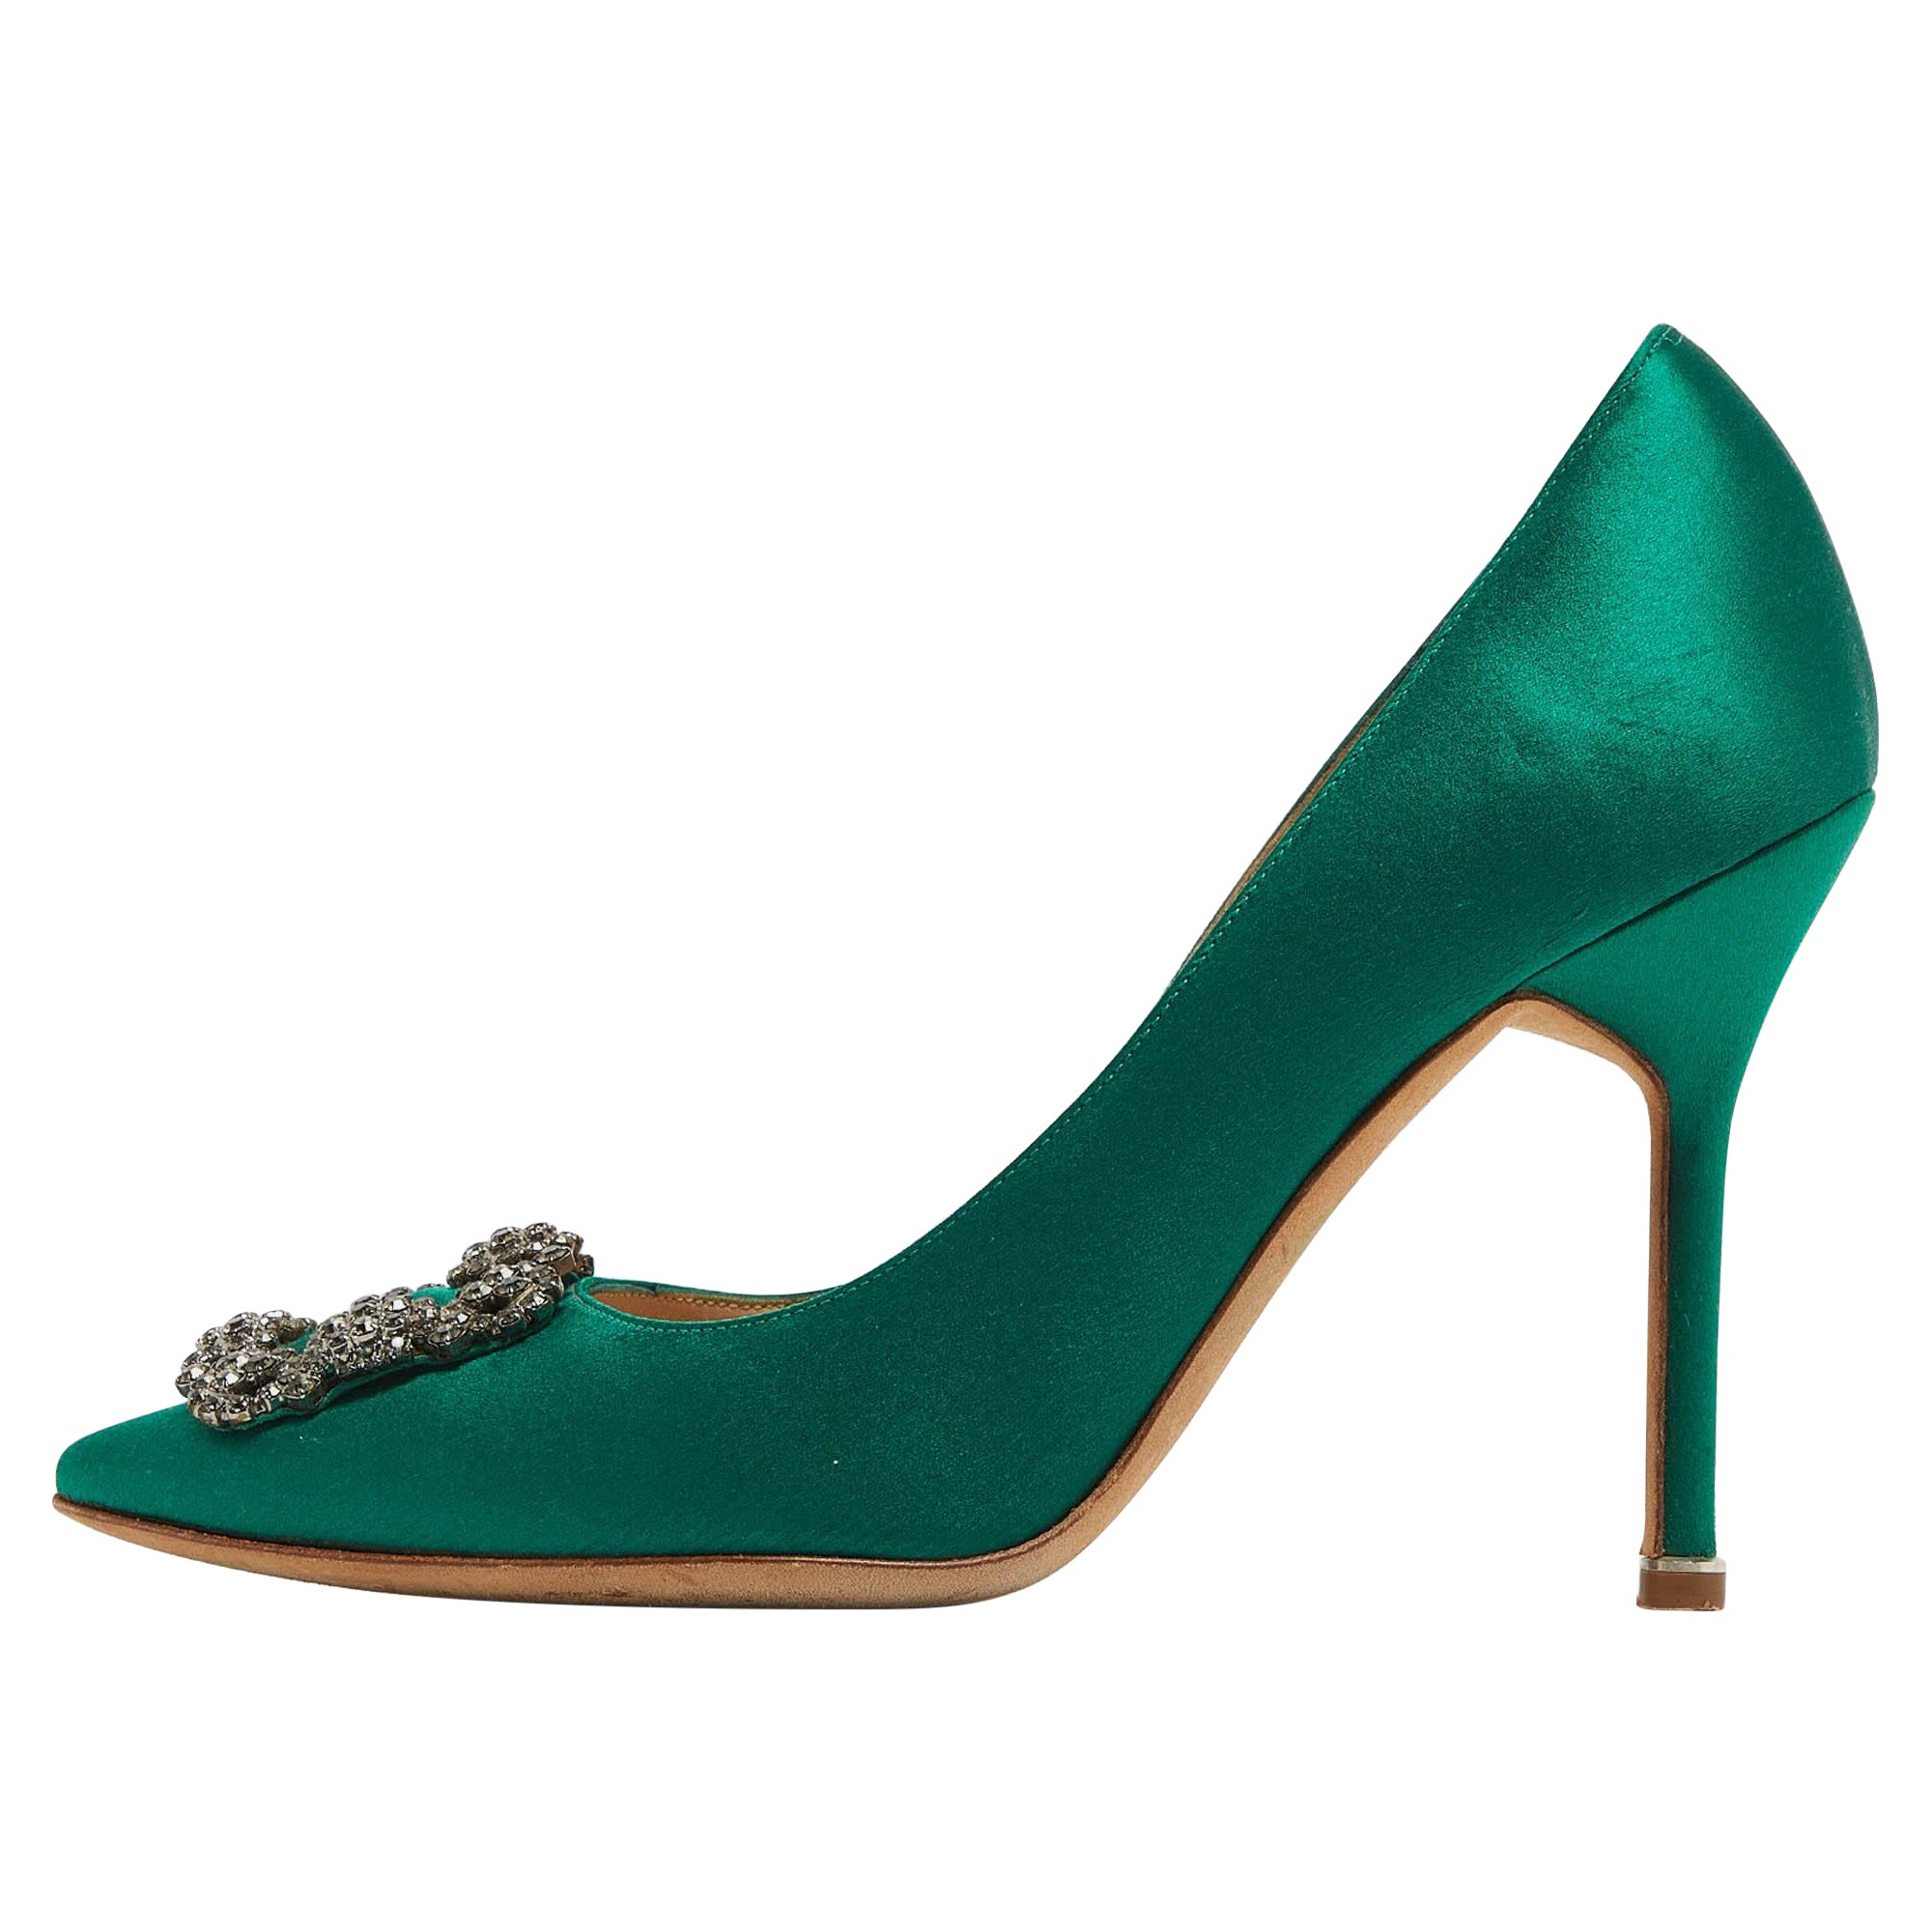 How are Manolo Blahnik shoes made?